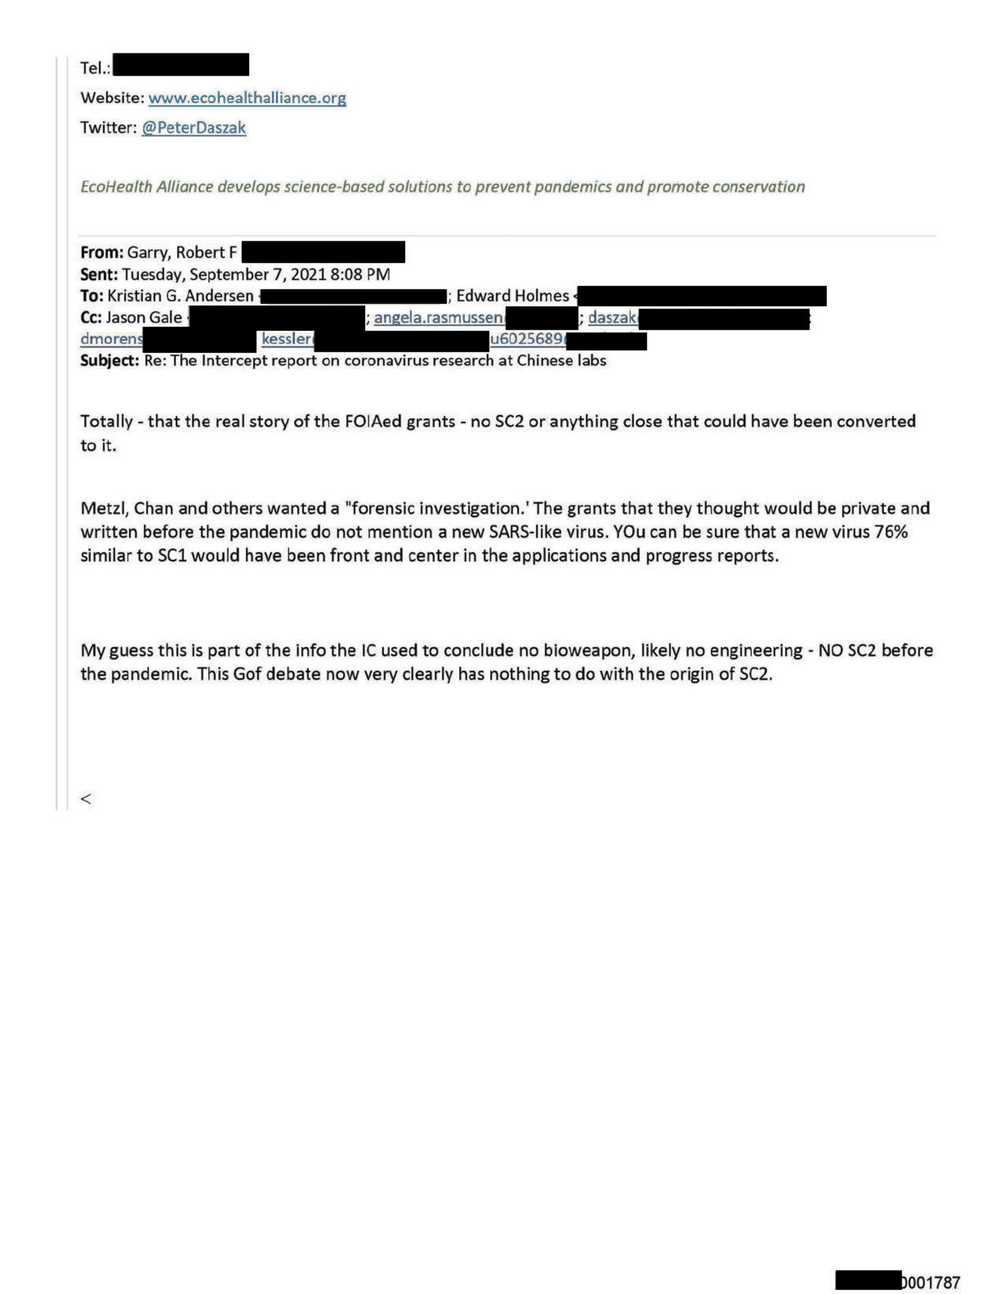 Page 14 from David Morens NIH Emails Redacted